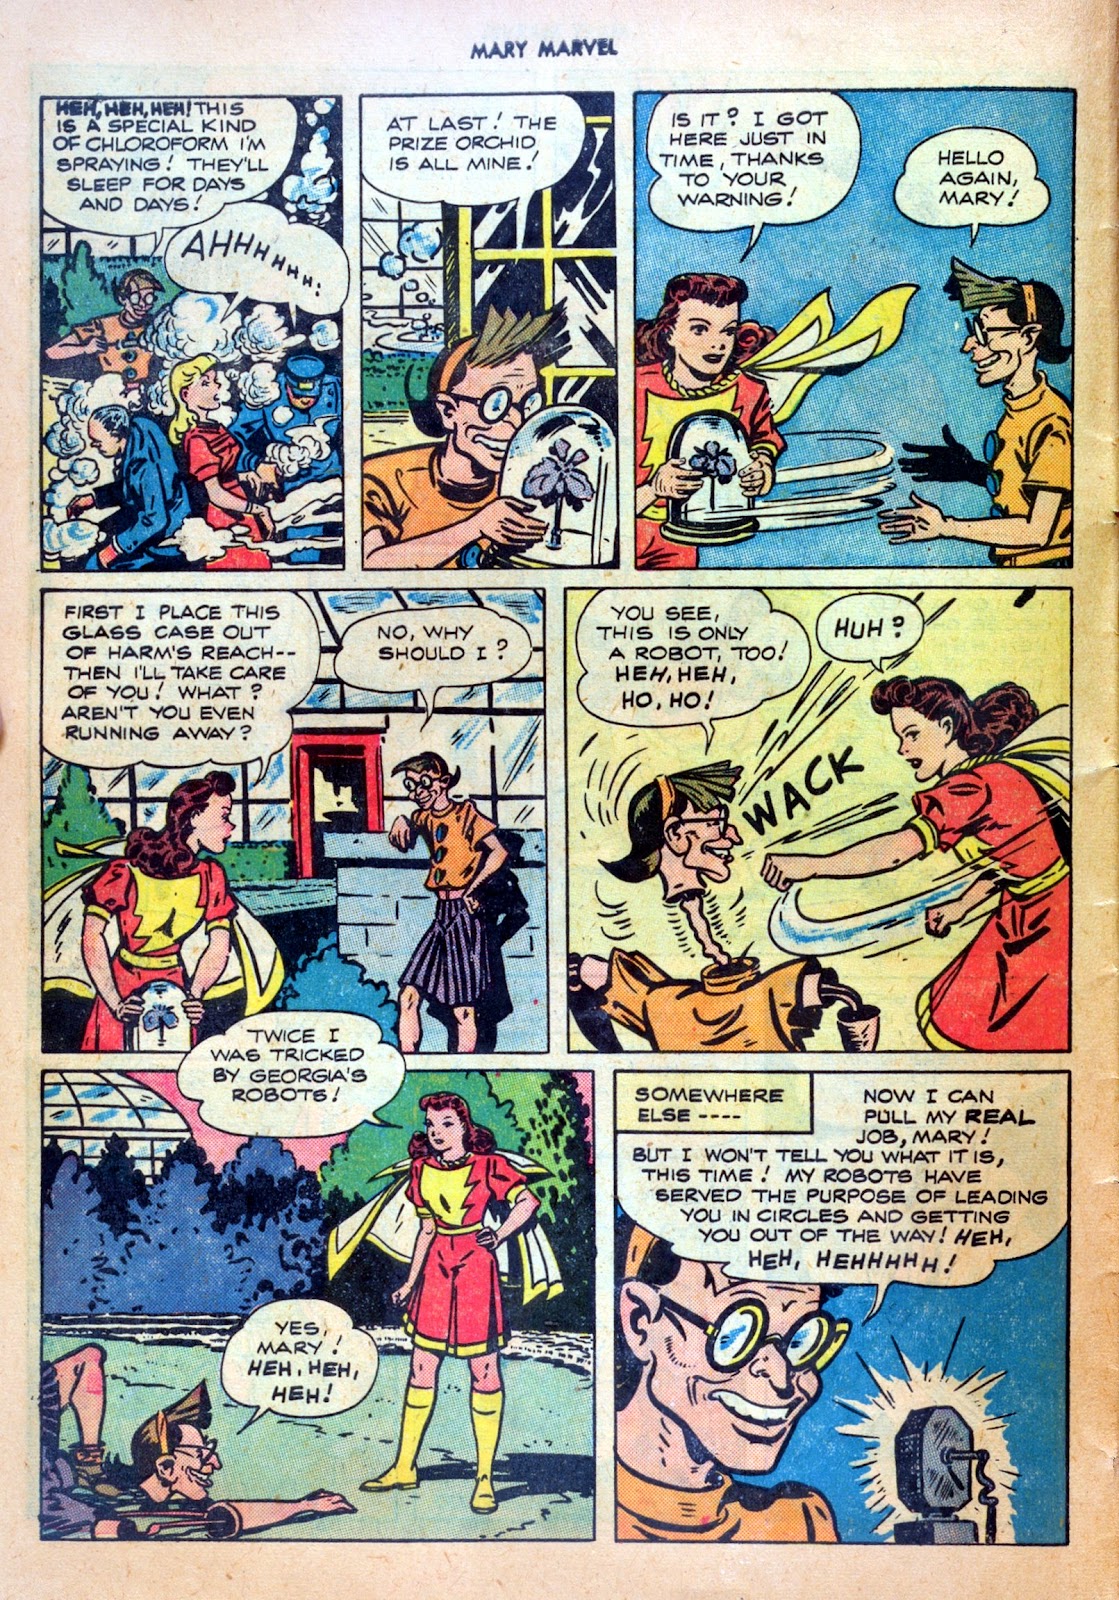 Read online Mary Marvel comic -  Issue #20 - 6